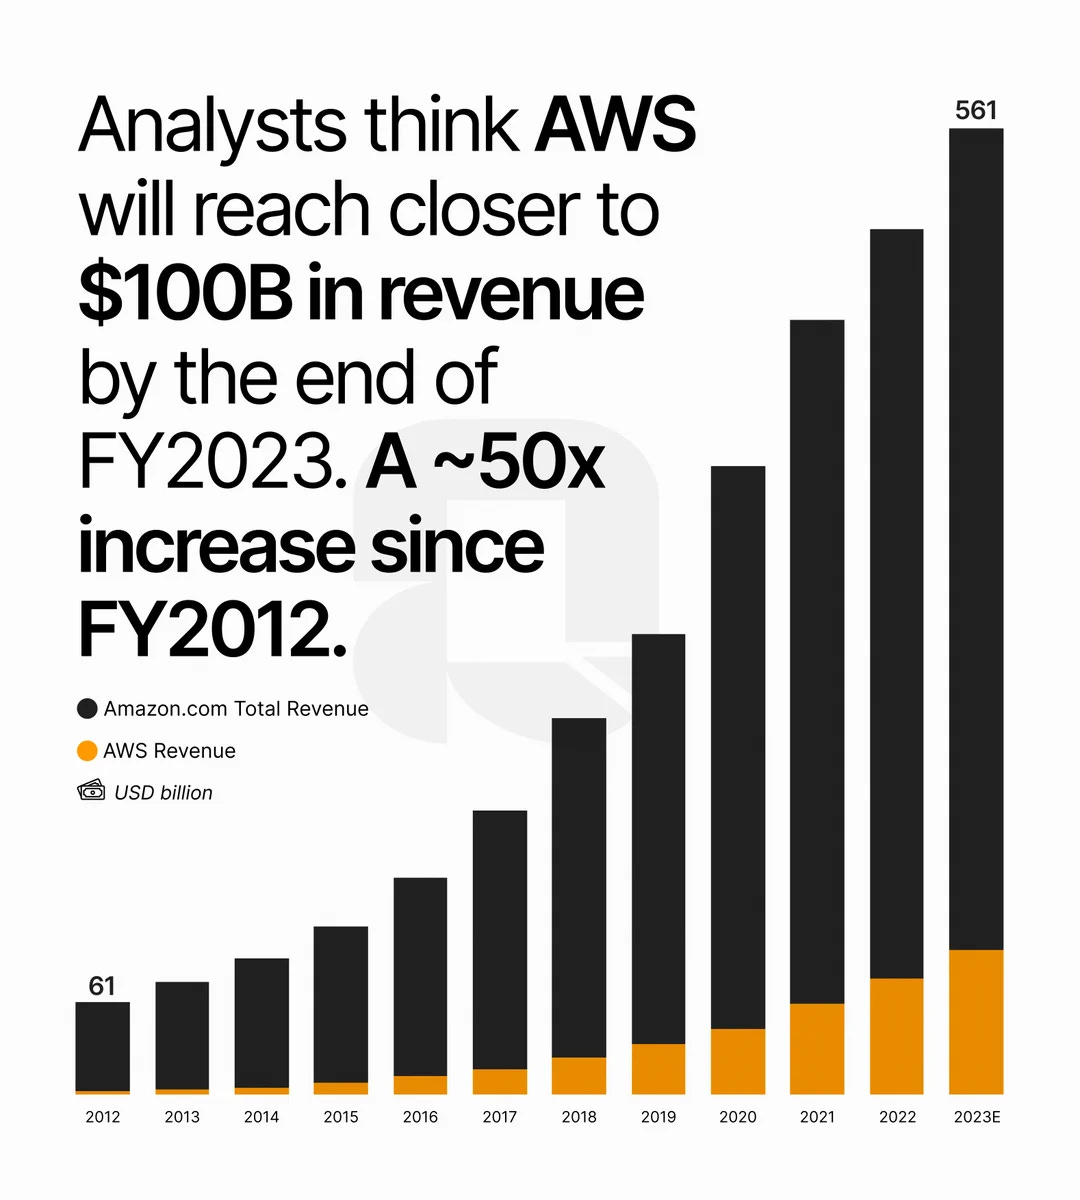 Analysts think AWS will reach closer to $100B in revenue by the end of FY2023